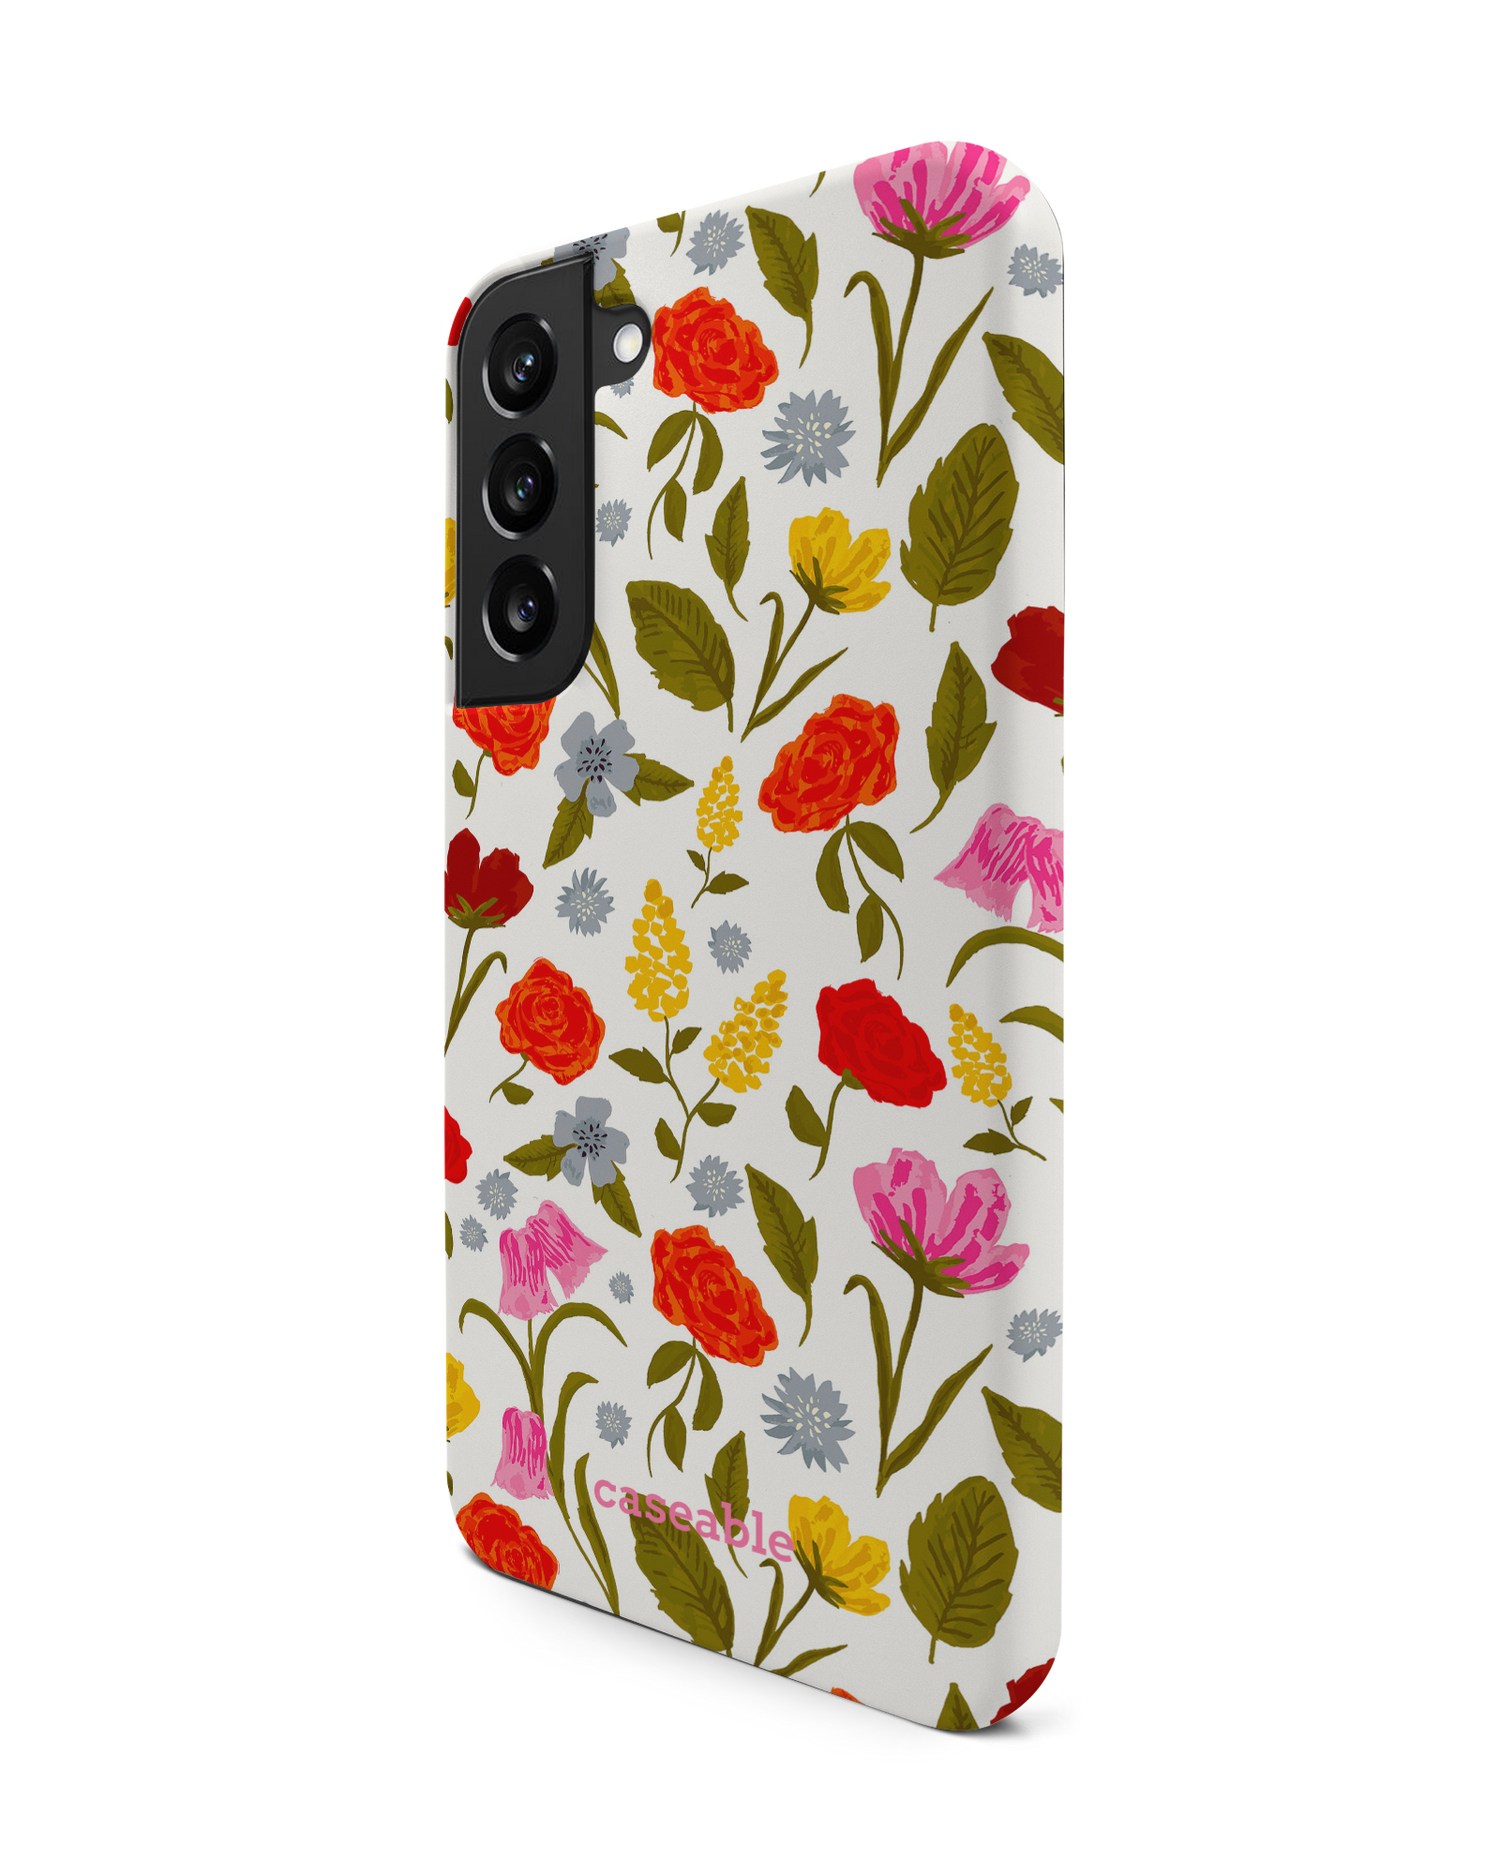 Botanical Beauties Premium Phone Case Samsung Galaxy S22 Plus 5G: View from the right side